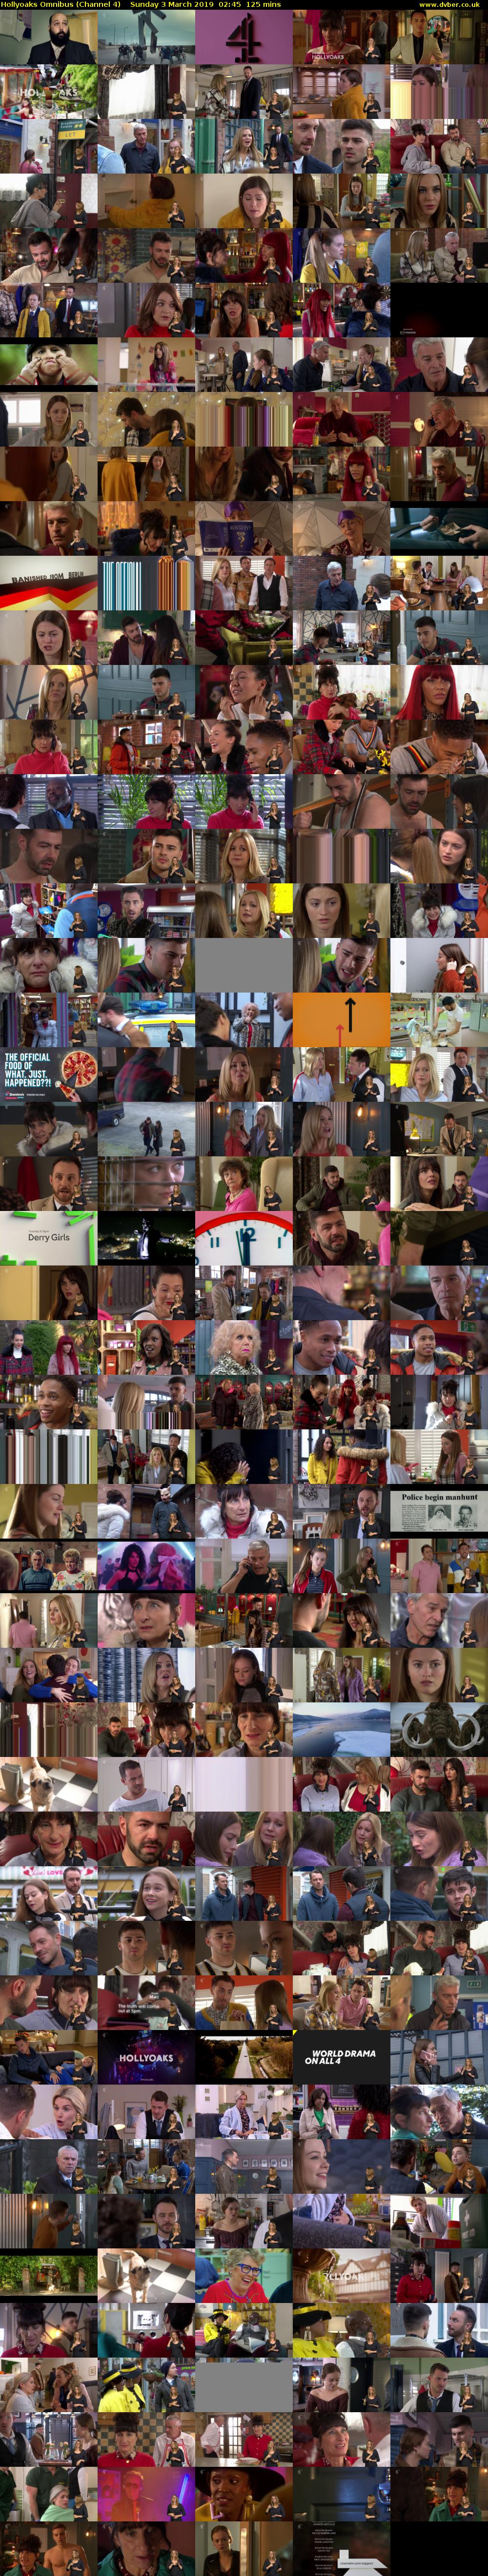 Hollyoaks Omnibus (Channel 4) Sunday 3 March 2019 02:45 - 04:50